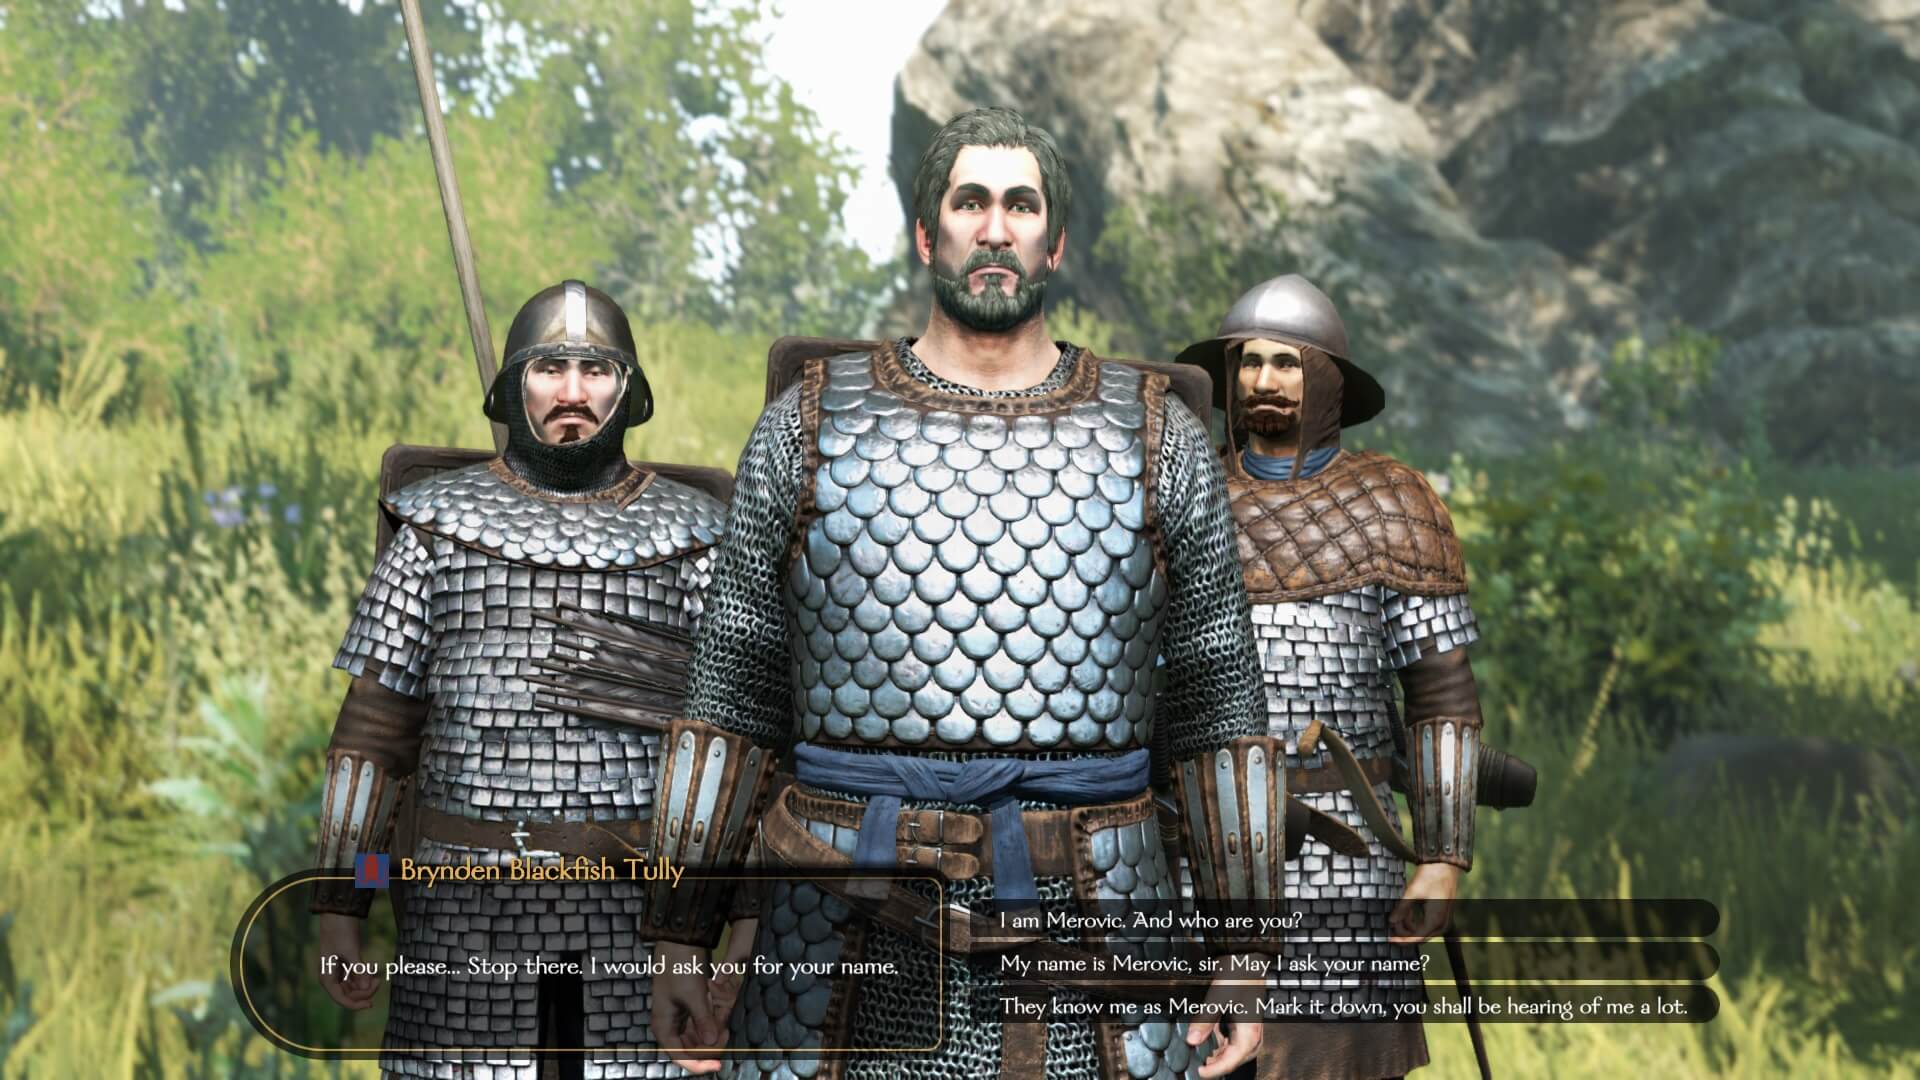 mount blade bannerlord game of thrones mod